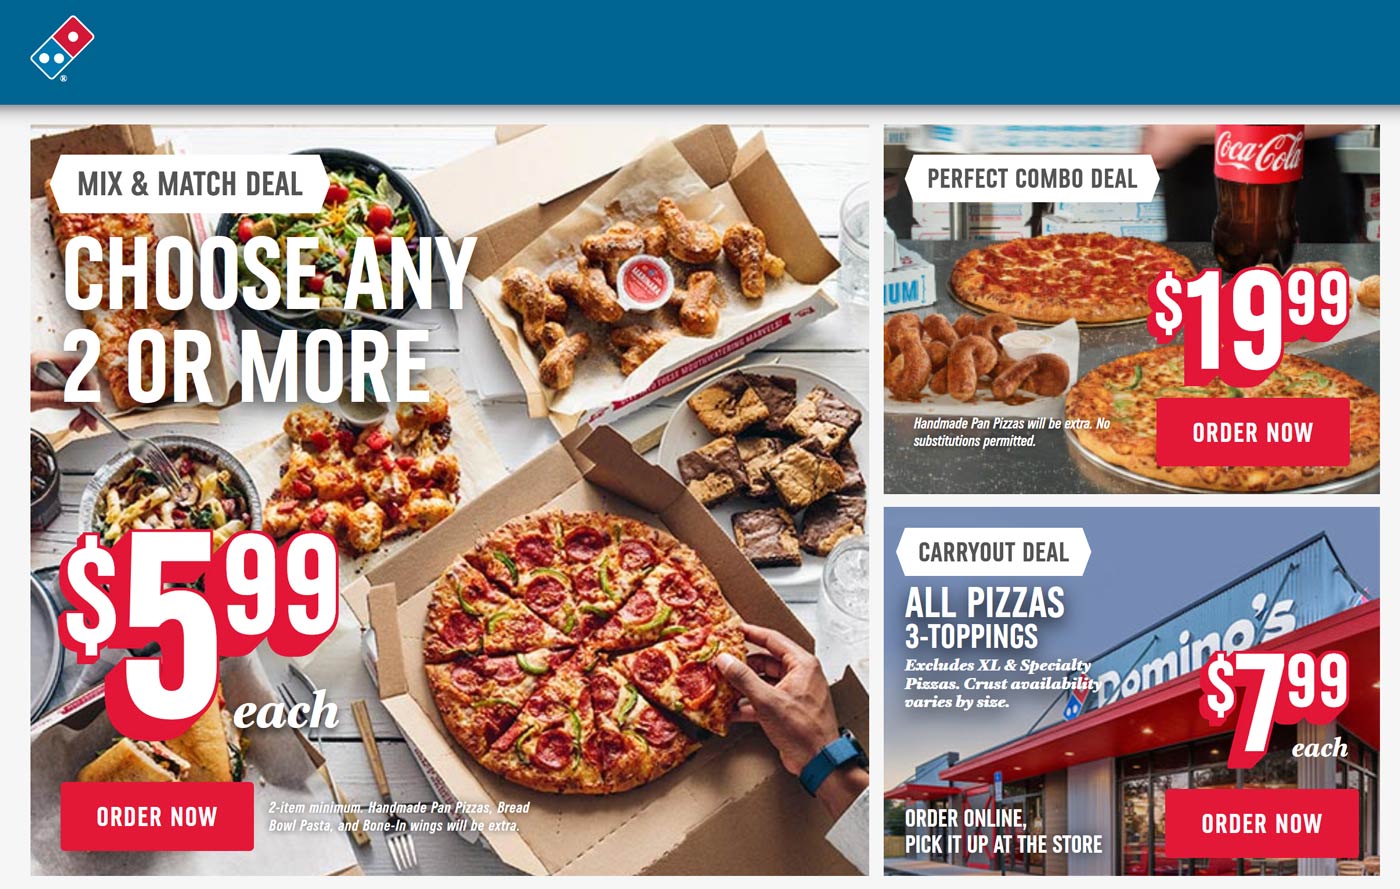 Dominos restaurants Coupon  3-topping pizzas = $8 at Dominos pizza #dominos 